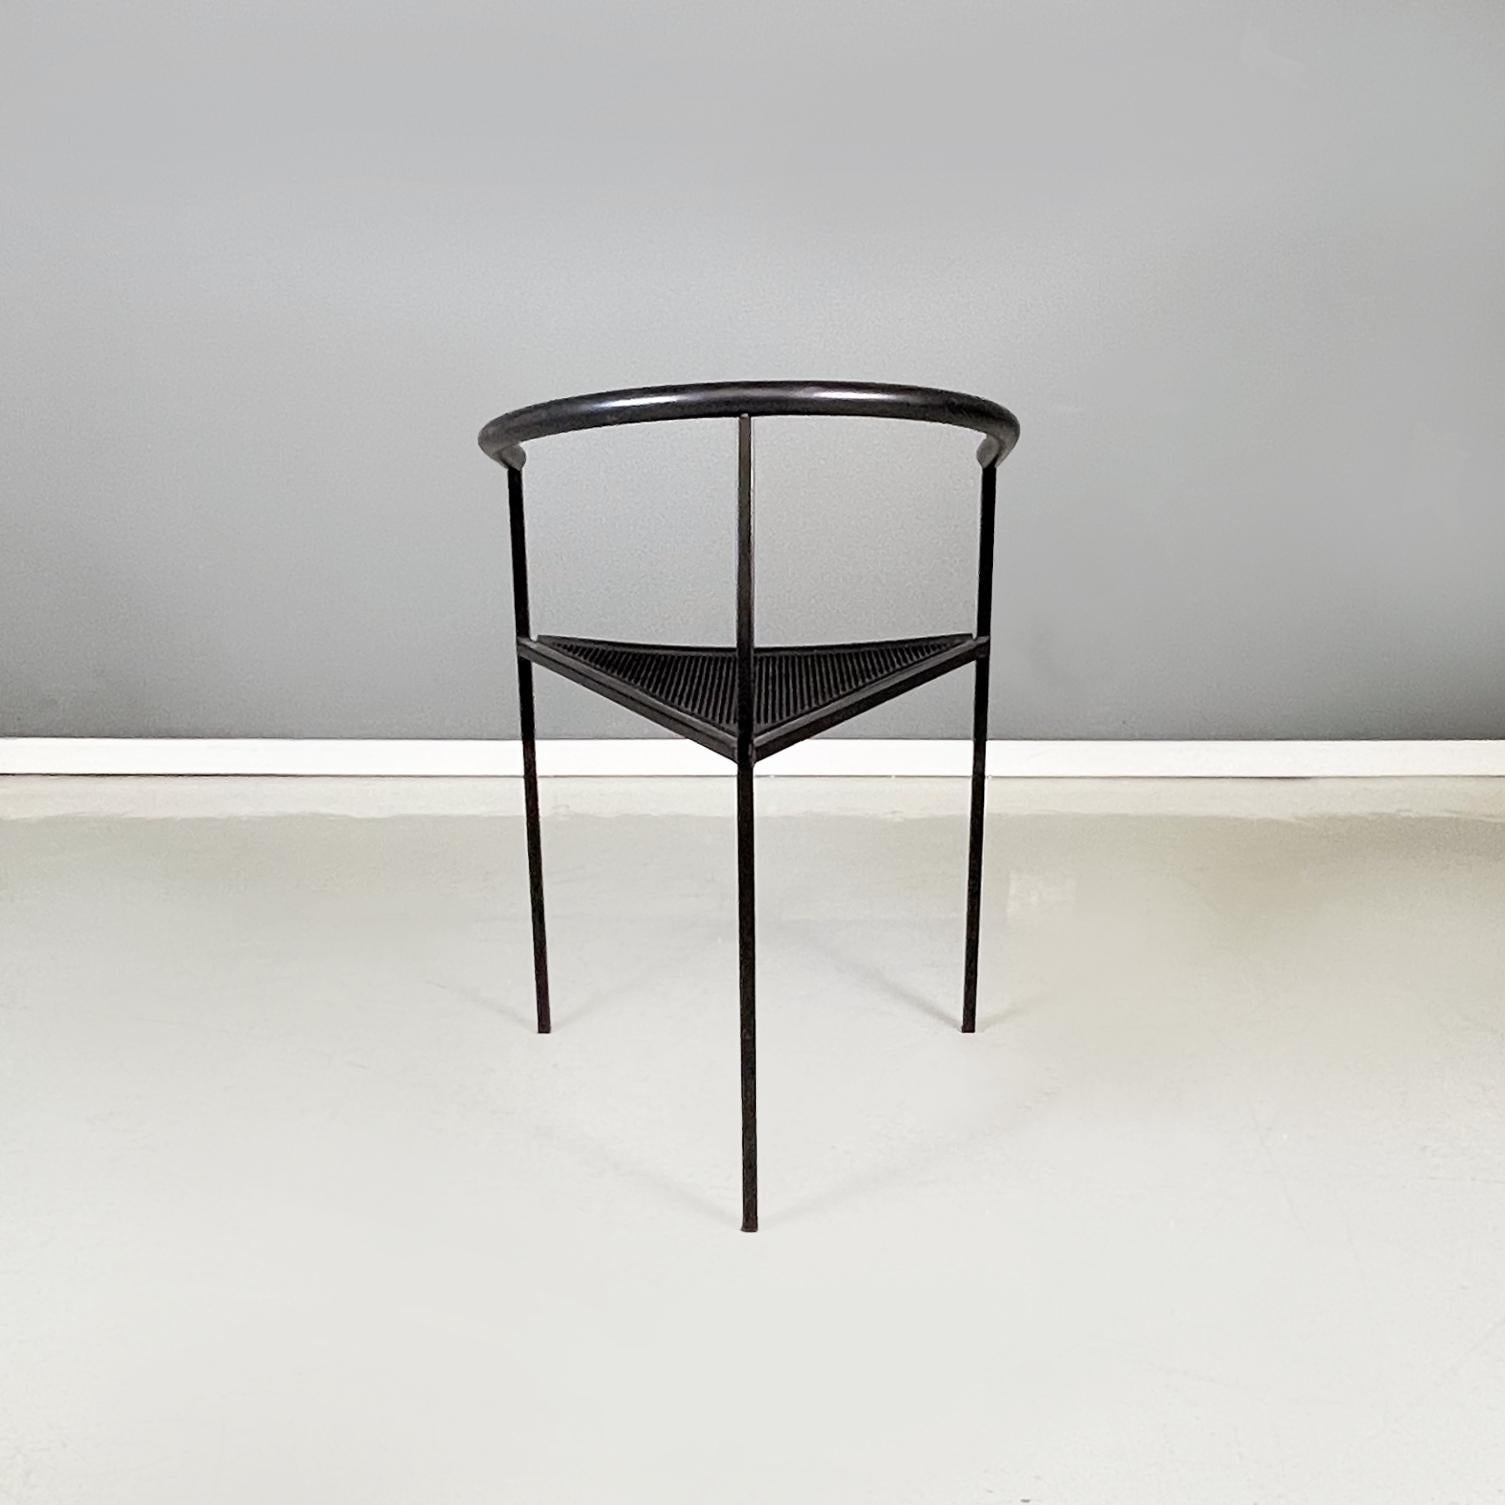 Late 20th Century Italian Modern Black Metal Rubber Chair by Peregalli and Calatroni for Zeus 1990